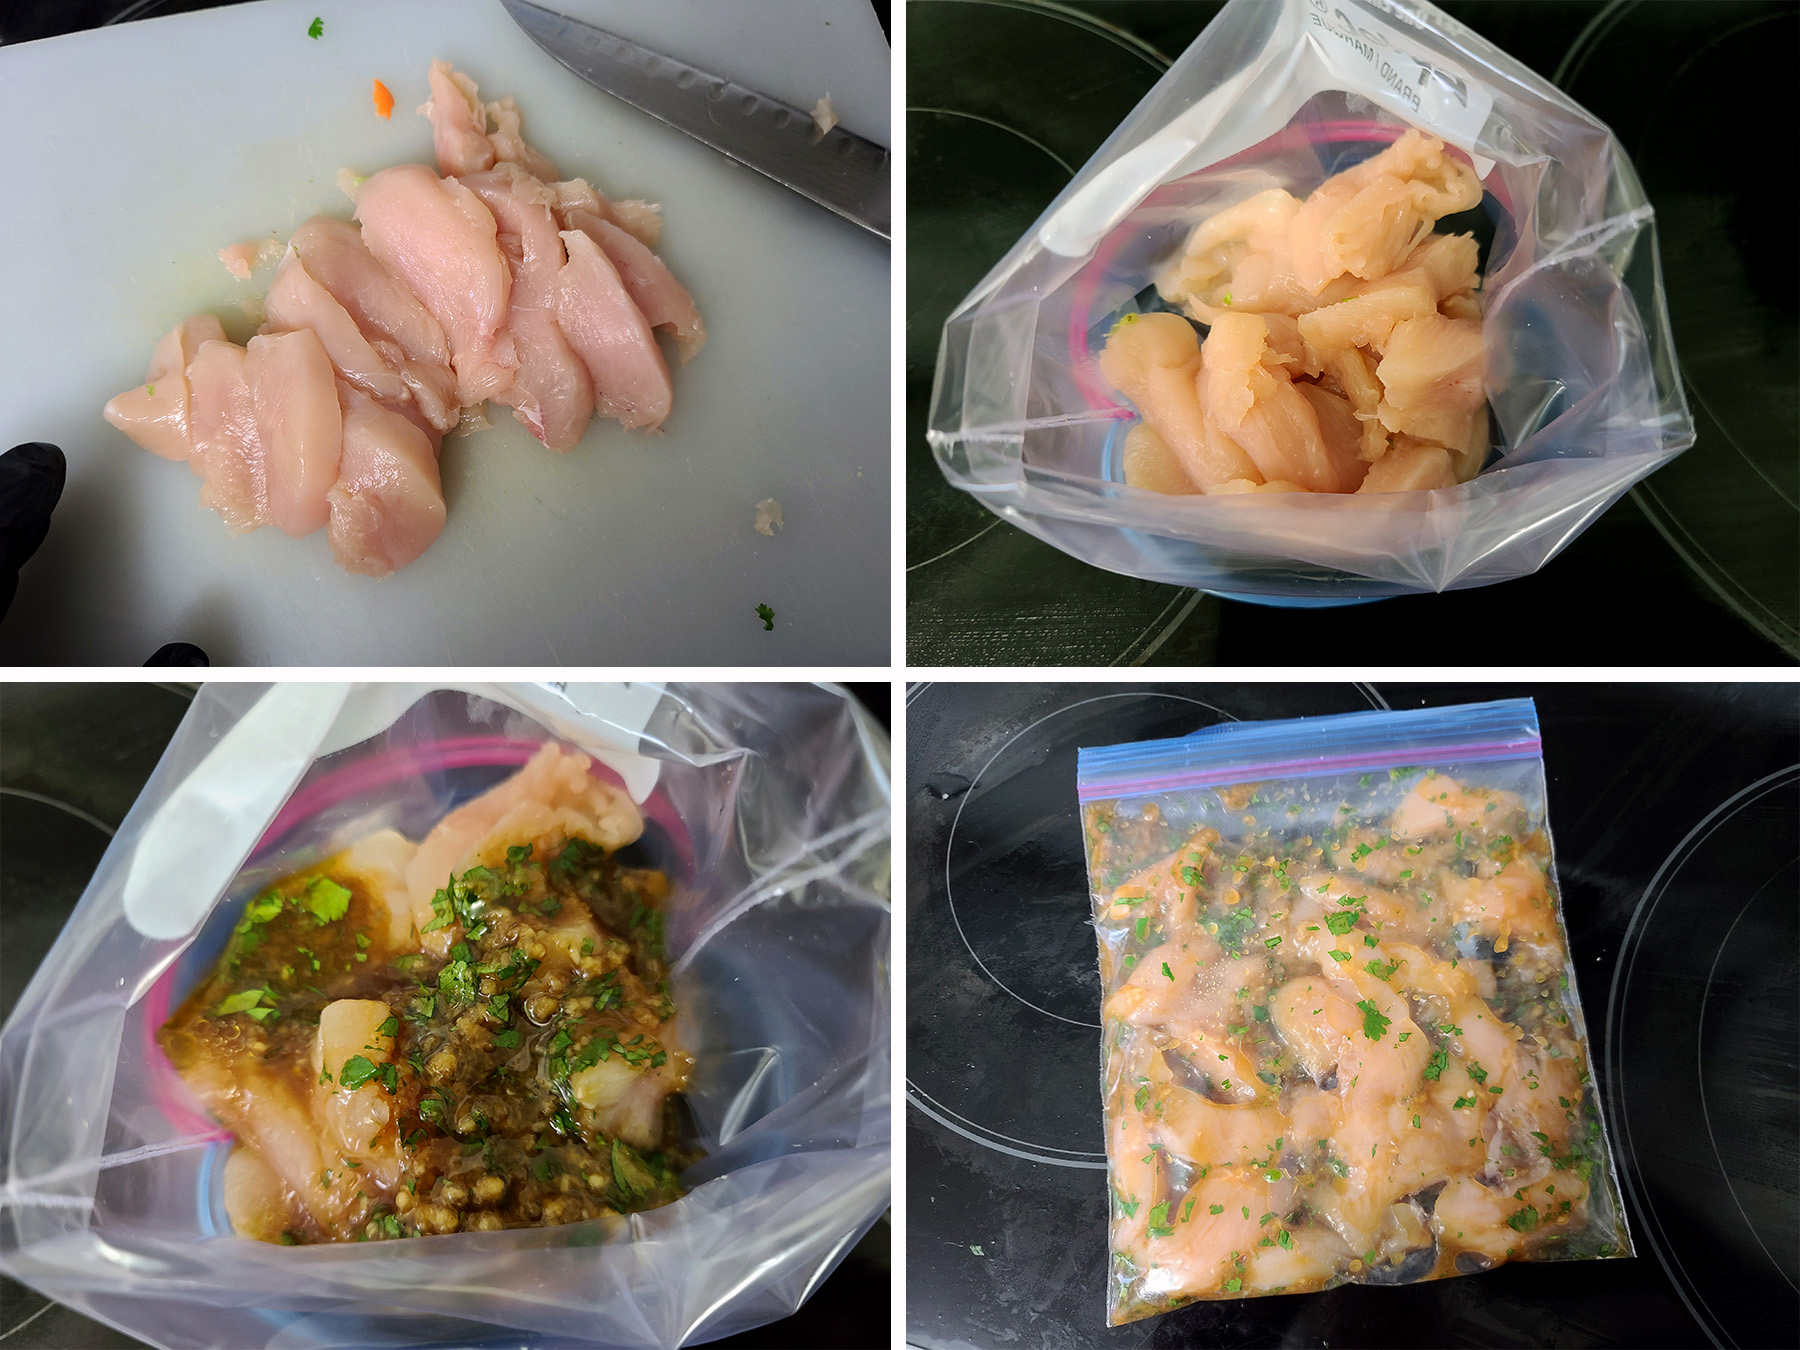 Chicken breast being sliced up and mixed with the marinade in a plastic baggie.